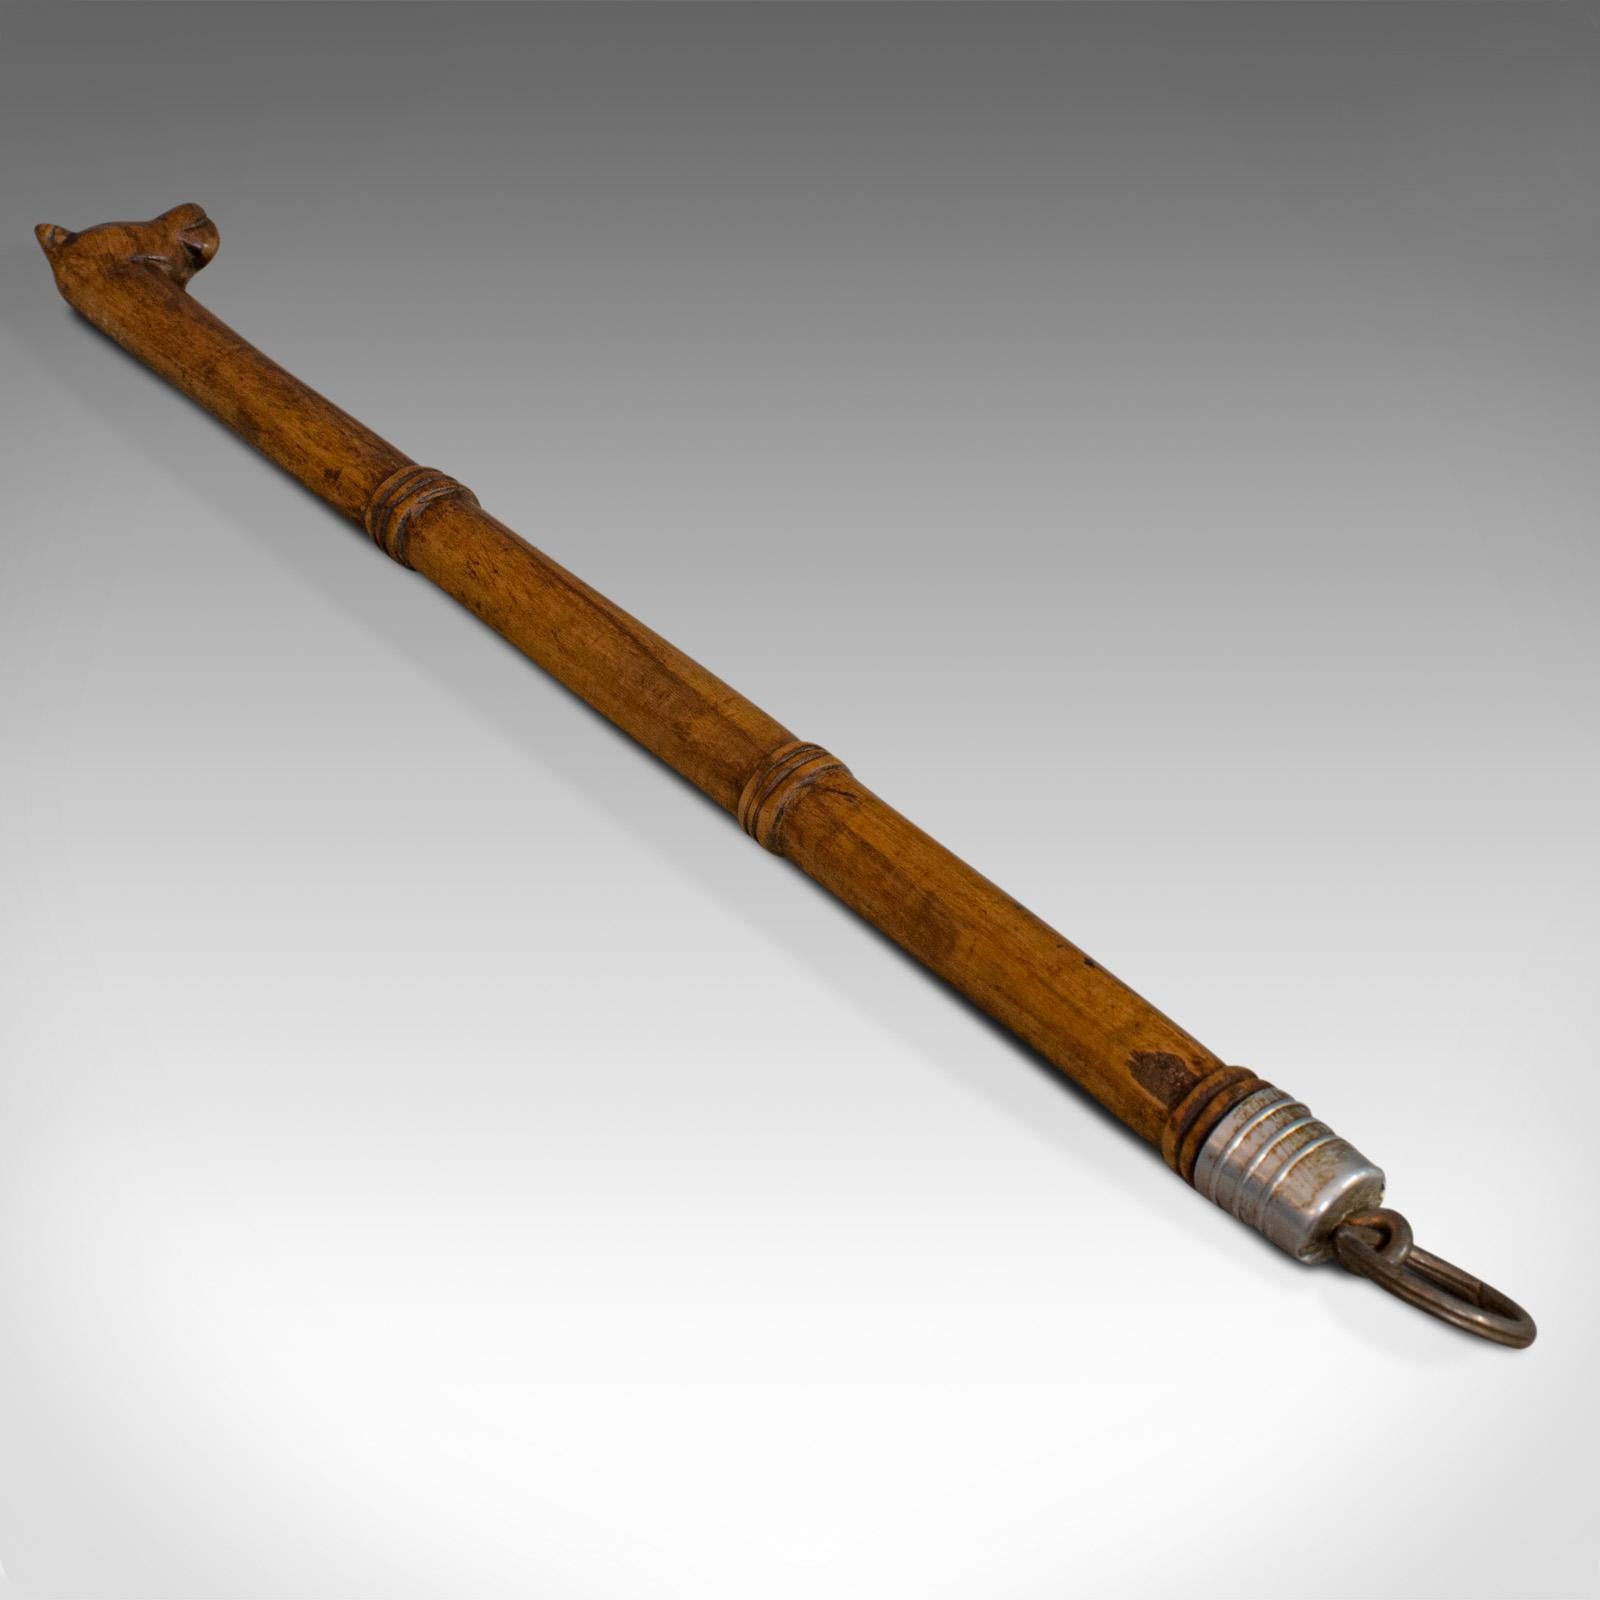 This is an antique back scratcher. An English, bamboo-ised beech treen with dog motif, dating to the Regency period, circa 1820.

Displays a desirable aged patina
Beech in caramel hues with fine grain interest
Bamboo-ised finish adds further